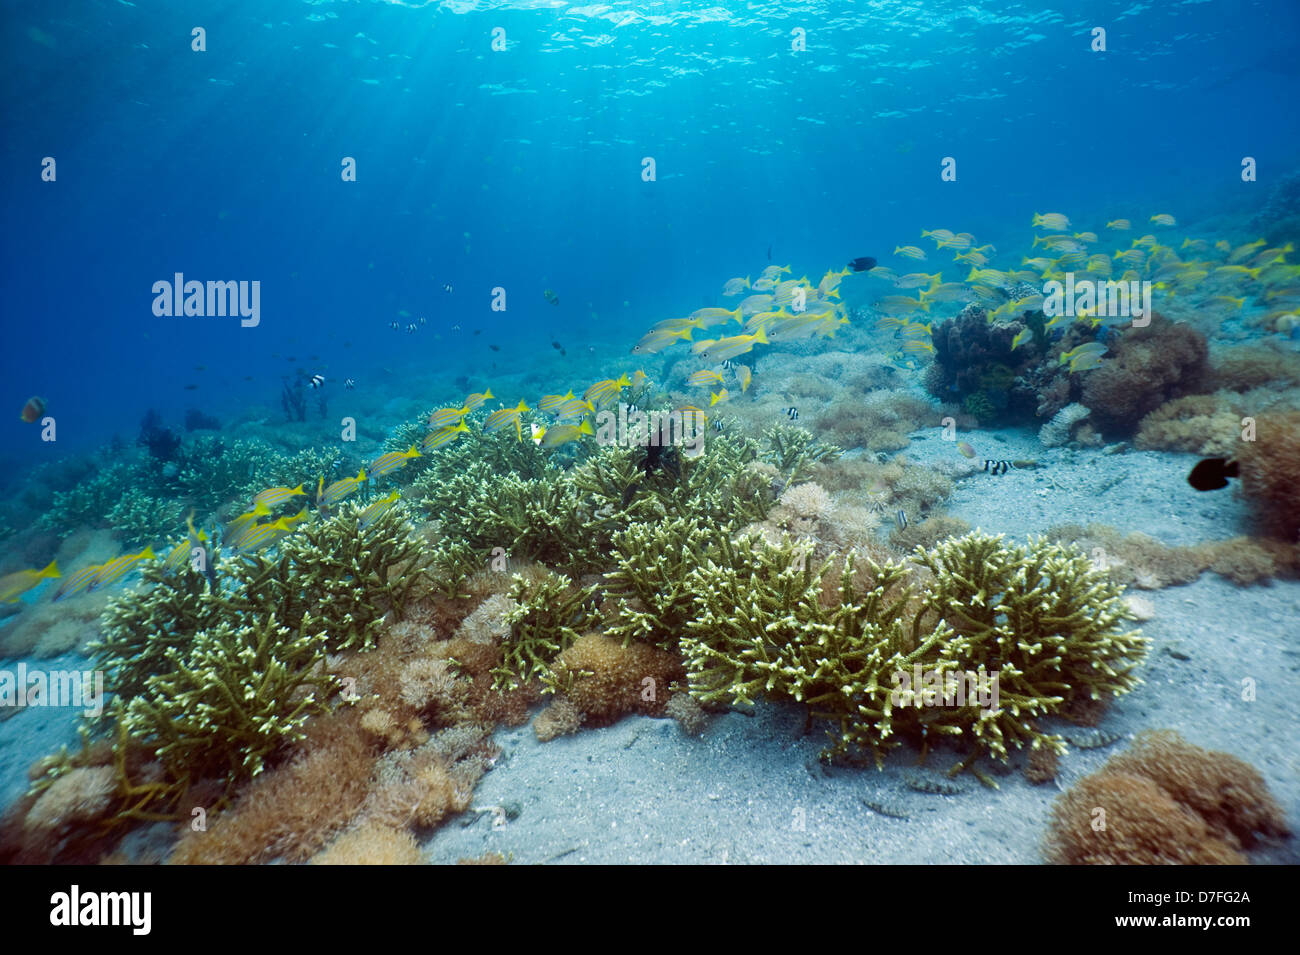 Coral reef scenery with a school of snappers. Rinca, Komodo National Park, Indonesia. Stock Photo